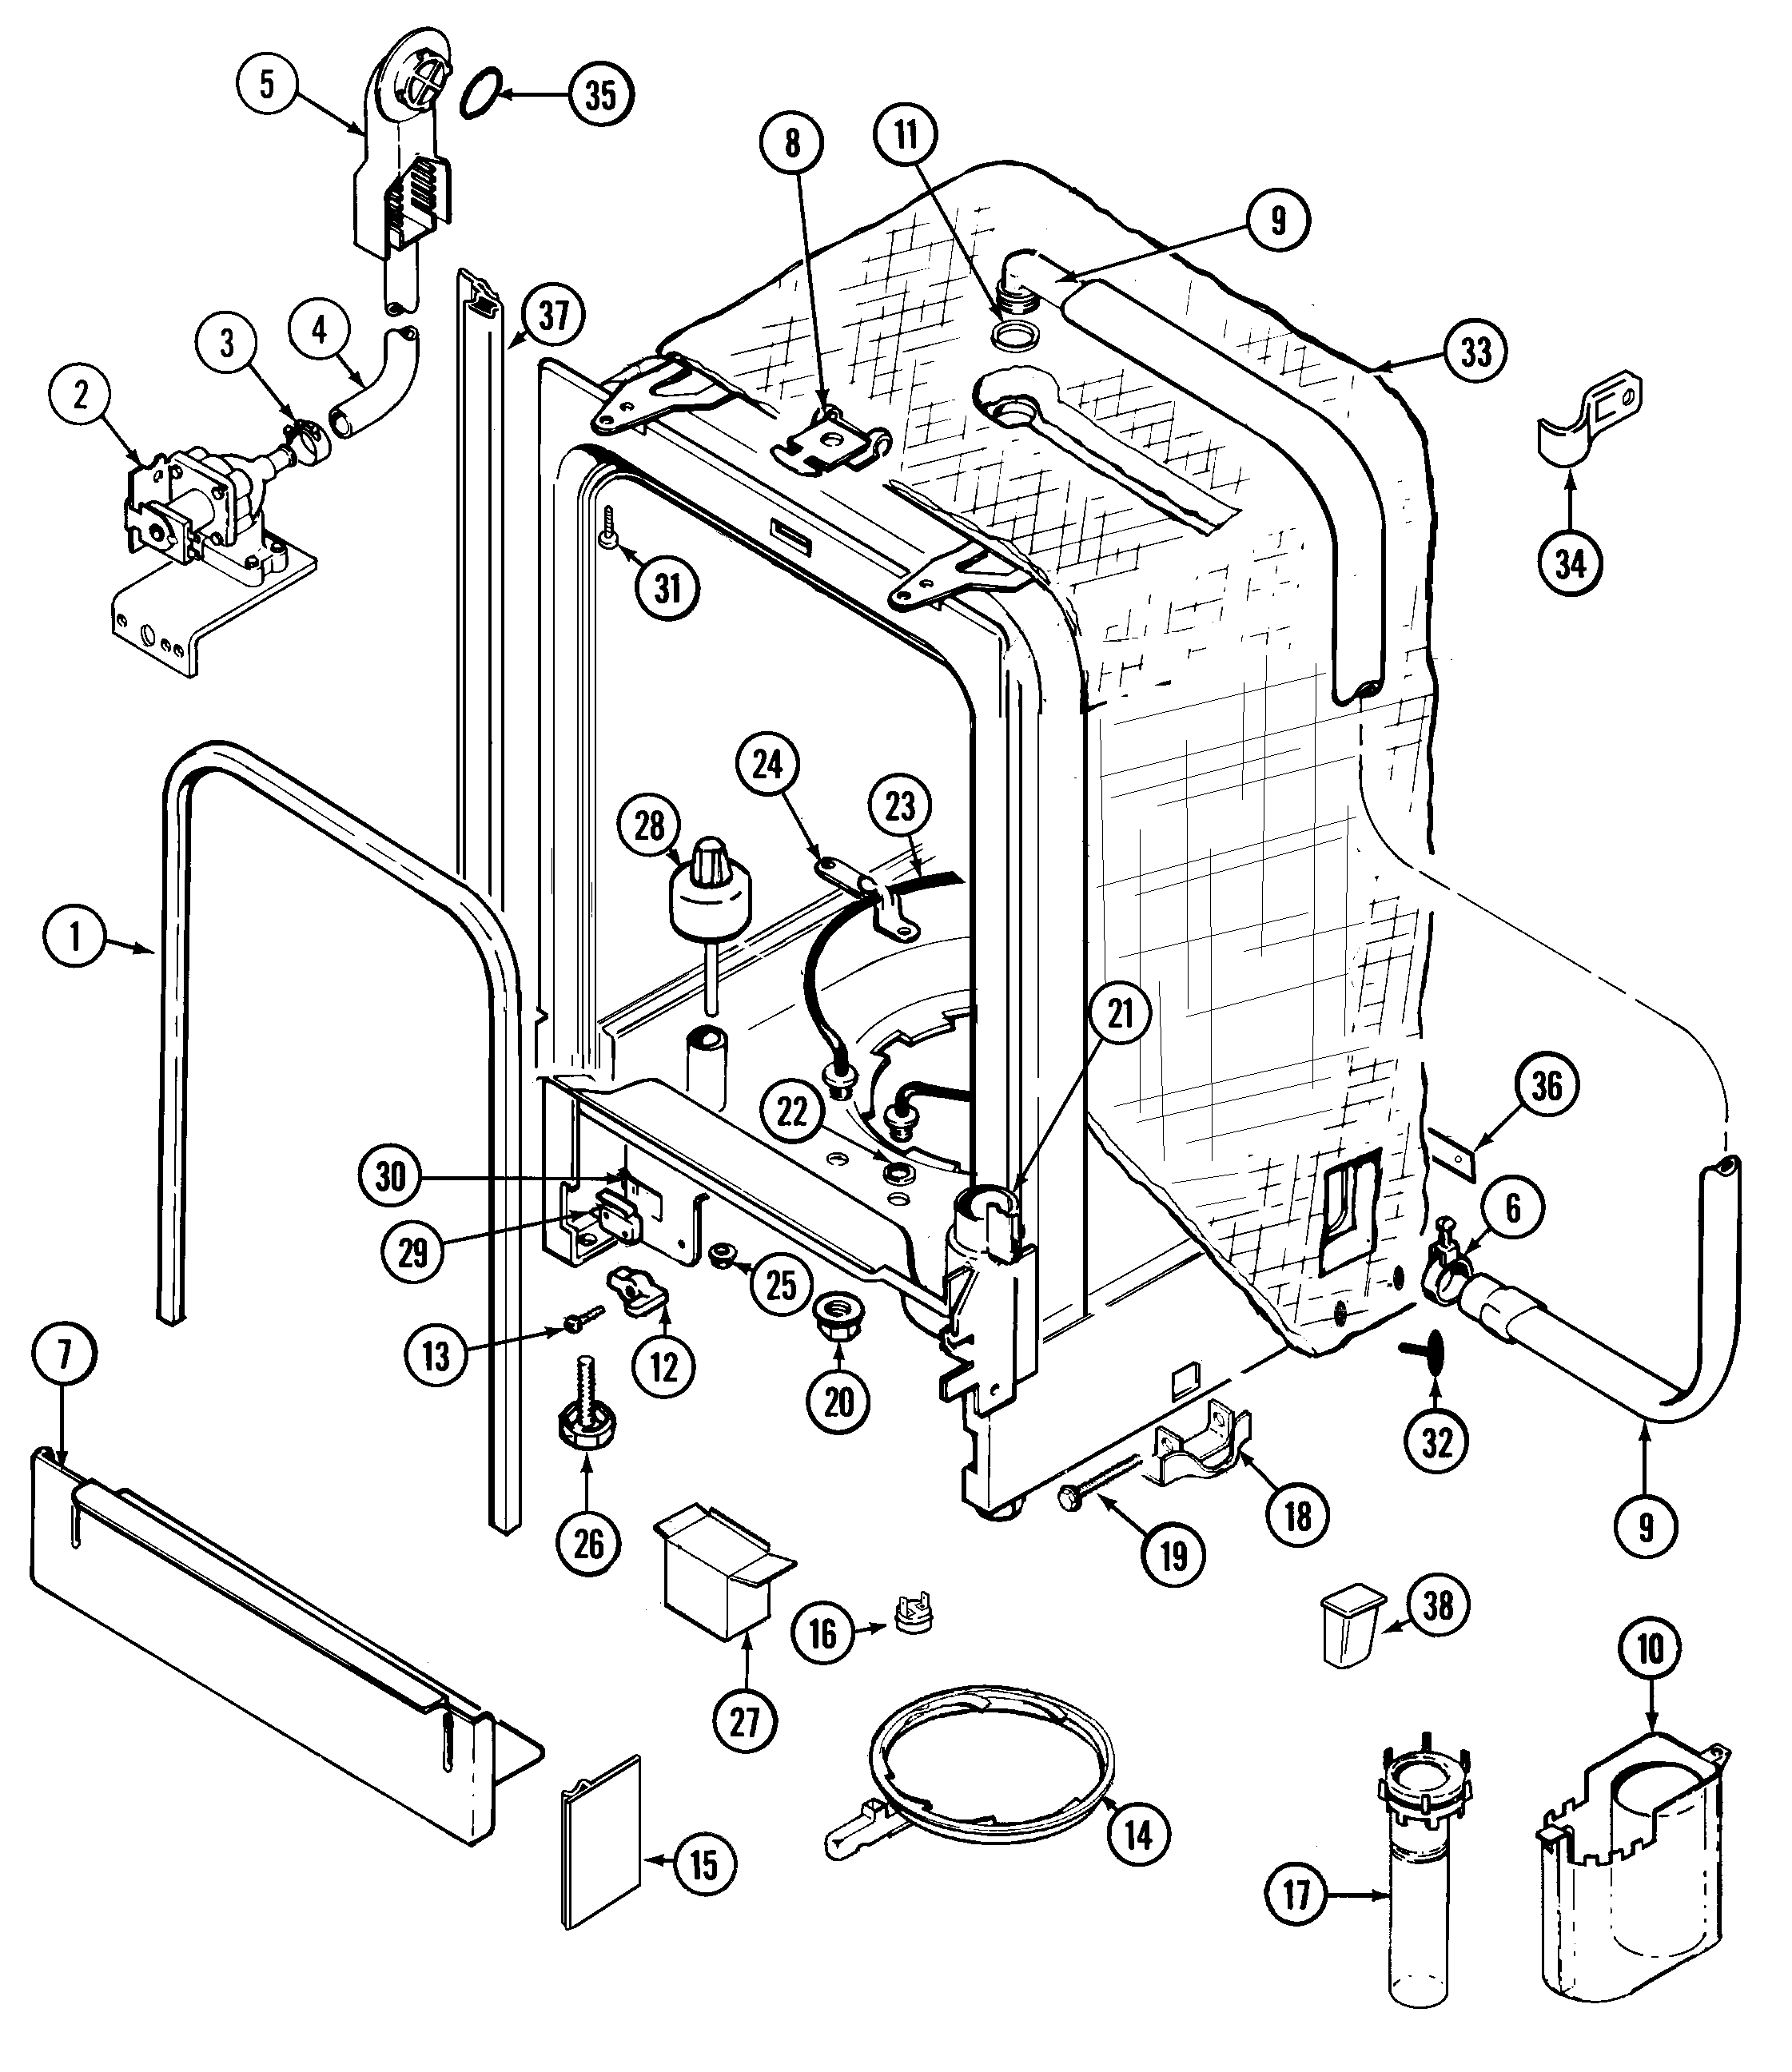 Wiring Diagram For Whirlpool Dishwasher from www.appliancetimers.com